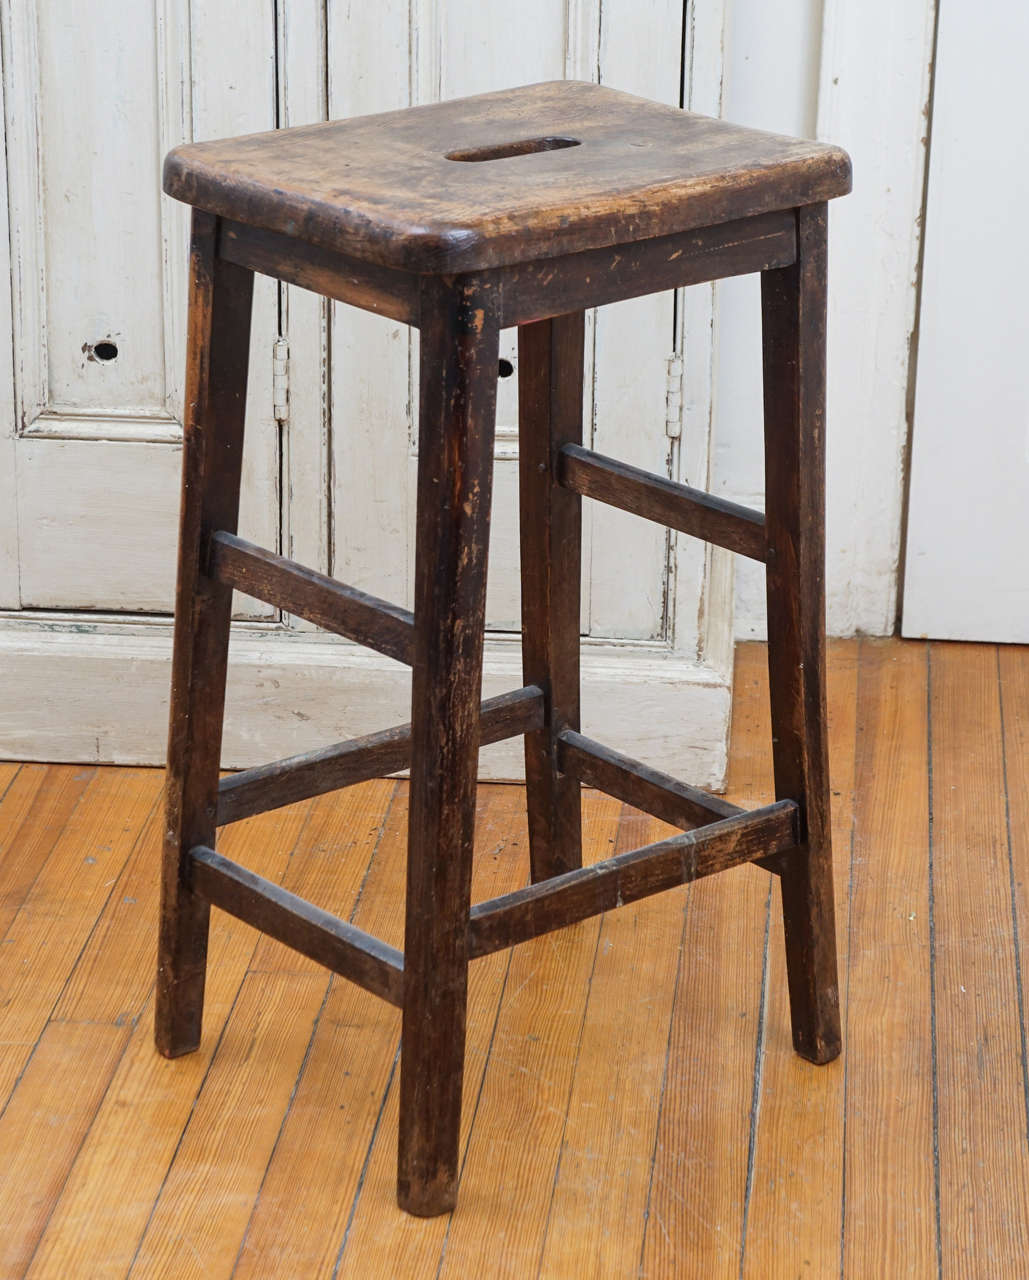 This is part of a collection of pub stools at painted porch. Each piece is unique and different. All of them can be used at a center island in a kitchen. Each could be cut by our restorer should you desire a shorter height. This particular stool has